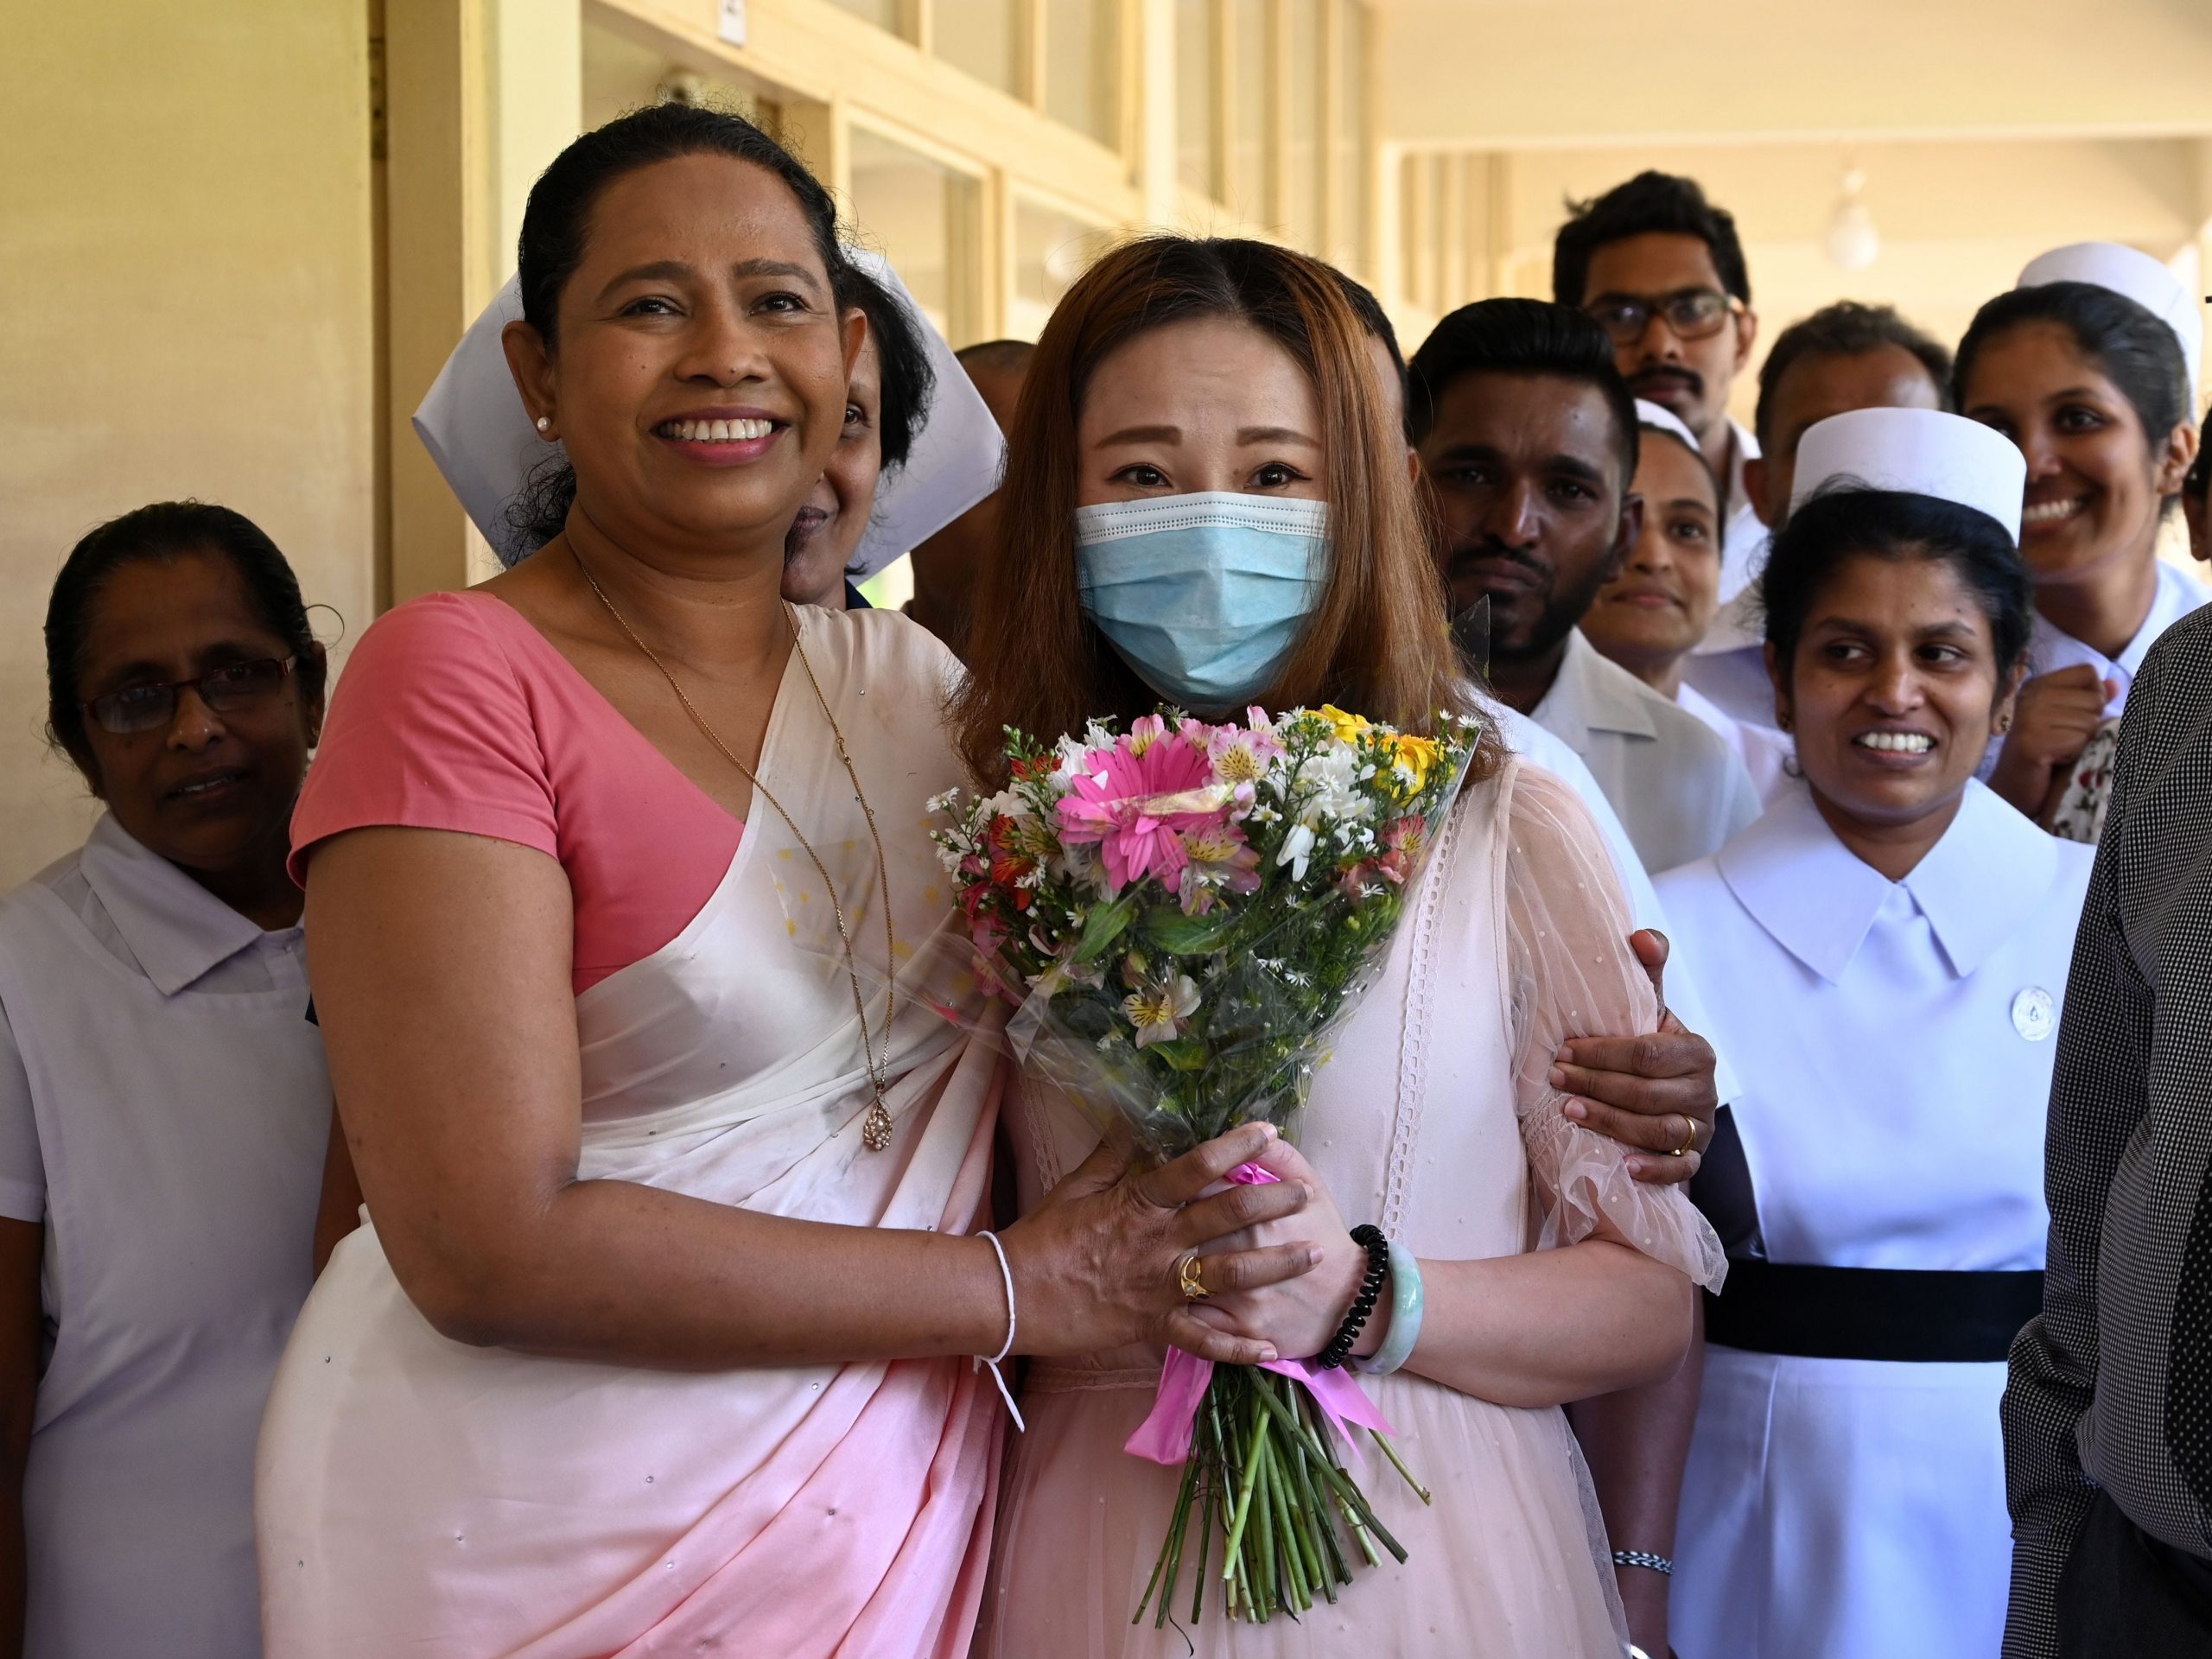 Former Sri Lankan Health Minister Pavithra Wanniarachchi poses with a Chinese tourist who was  discharged from a hospital after contracting COVID. The photo was taken at the main infectious diseases hospital near Colombo on February 19, 2020, following her recovery.